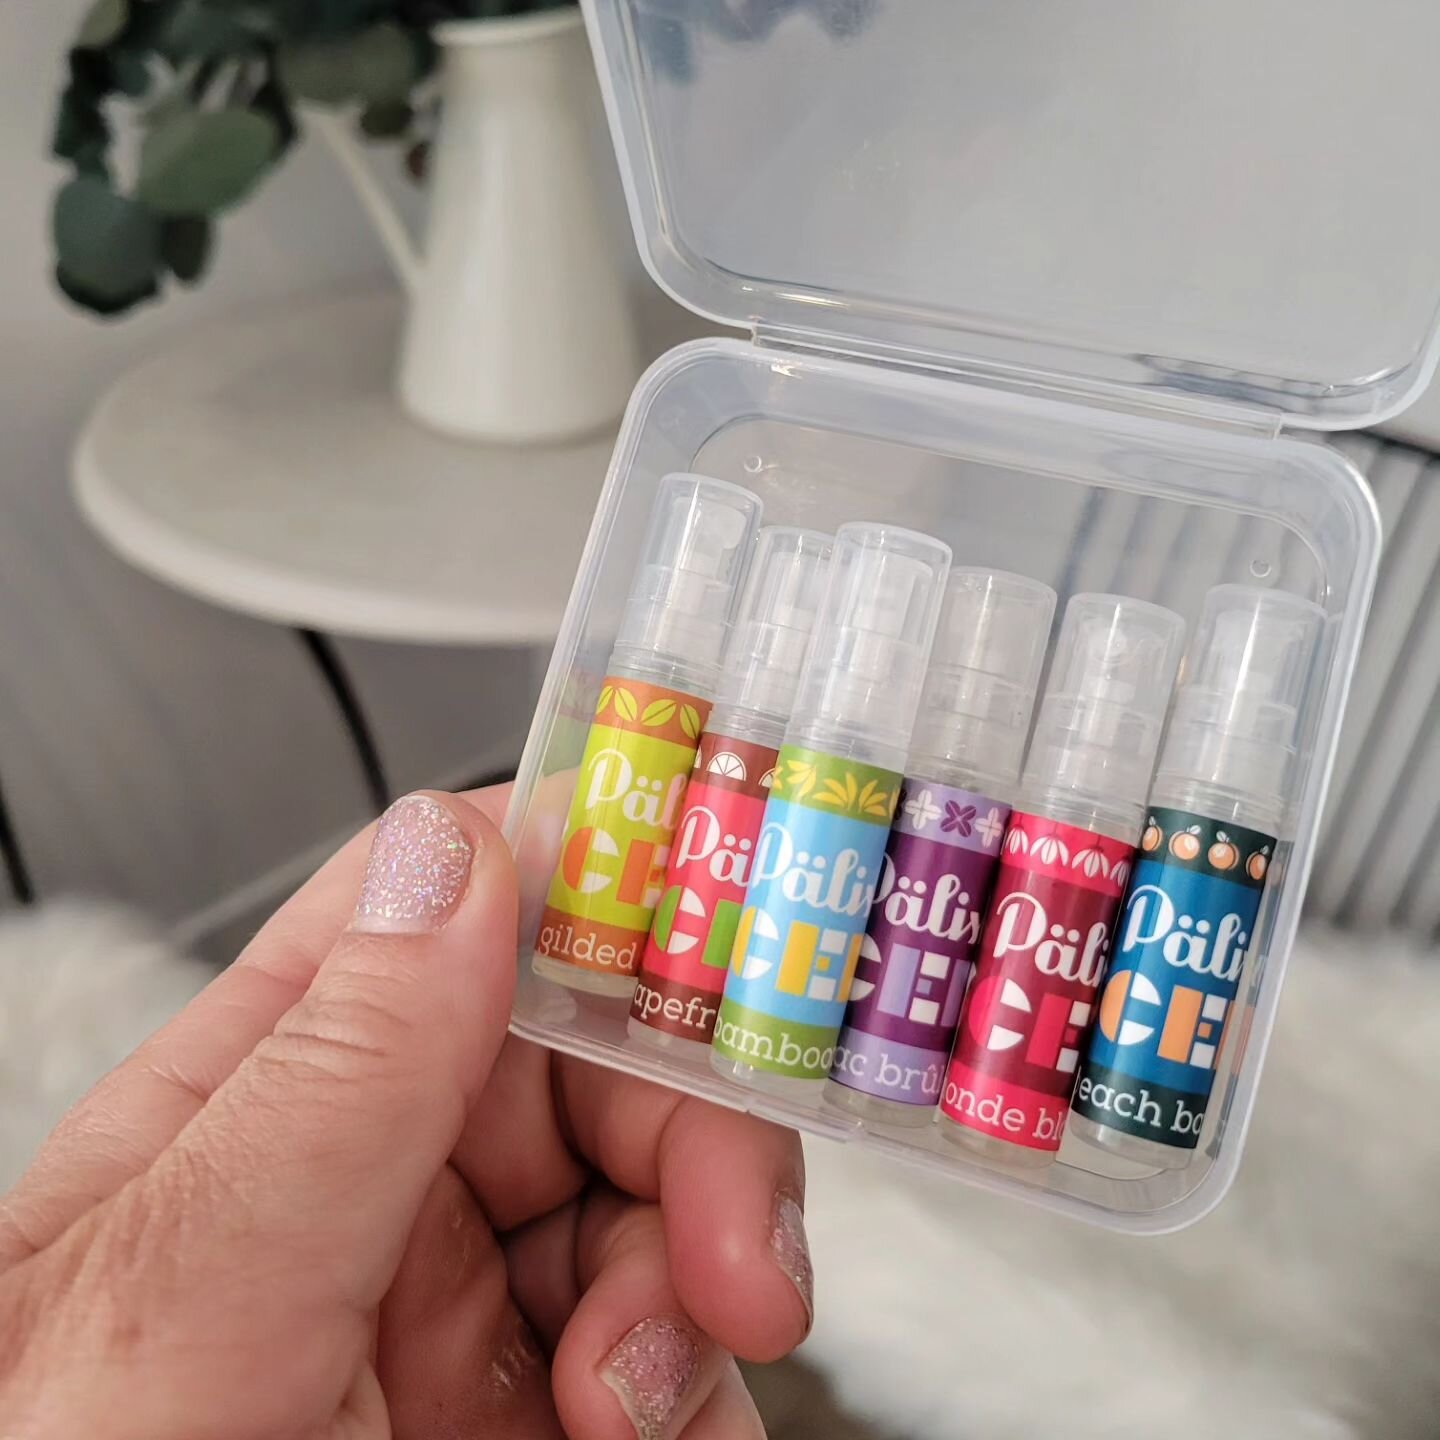 Something new is coming!!❣️❣️
.
Sometimes it just takes one person saying something to ignite an idea. @cristinamtaylor
.
Its hard to smell my unique scents through a computer. 🤣 So, introducing the mini travel perfume sprays. 2 mL each in a set of 